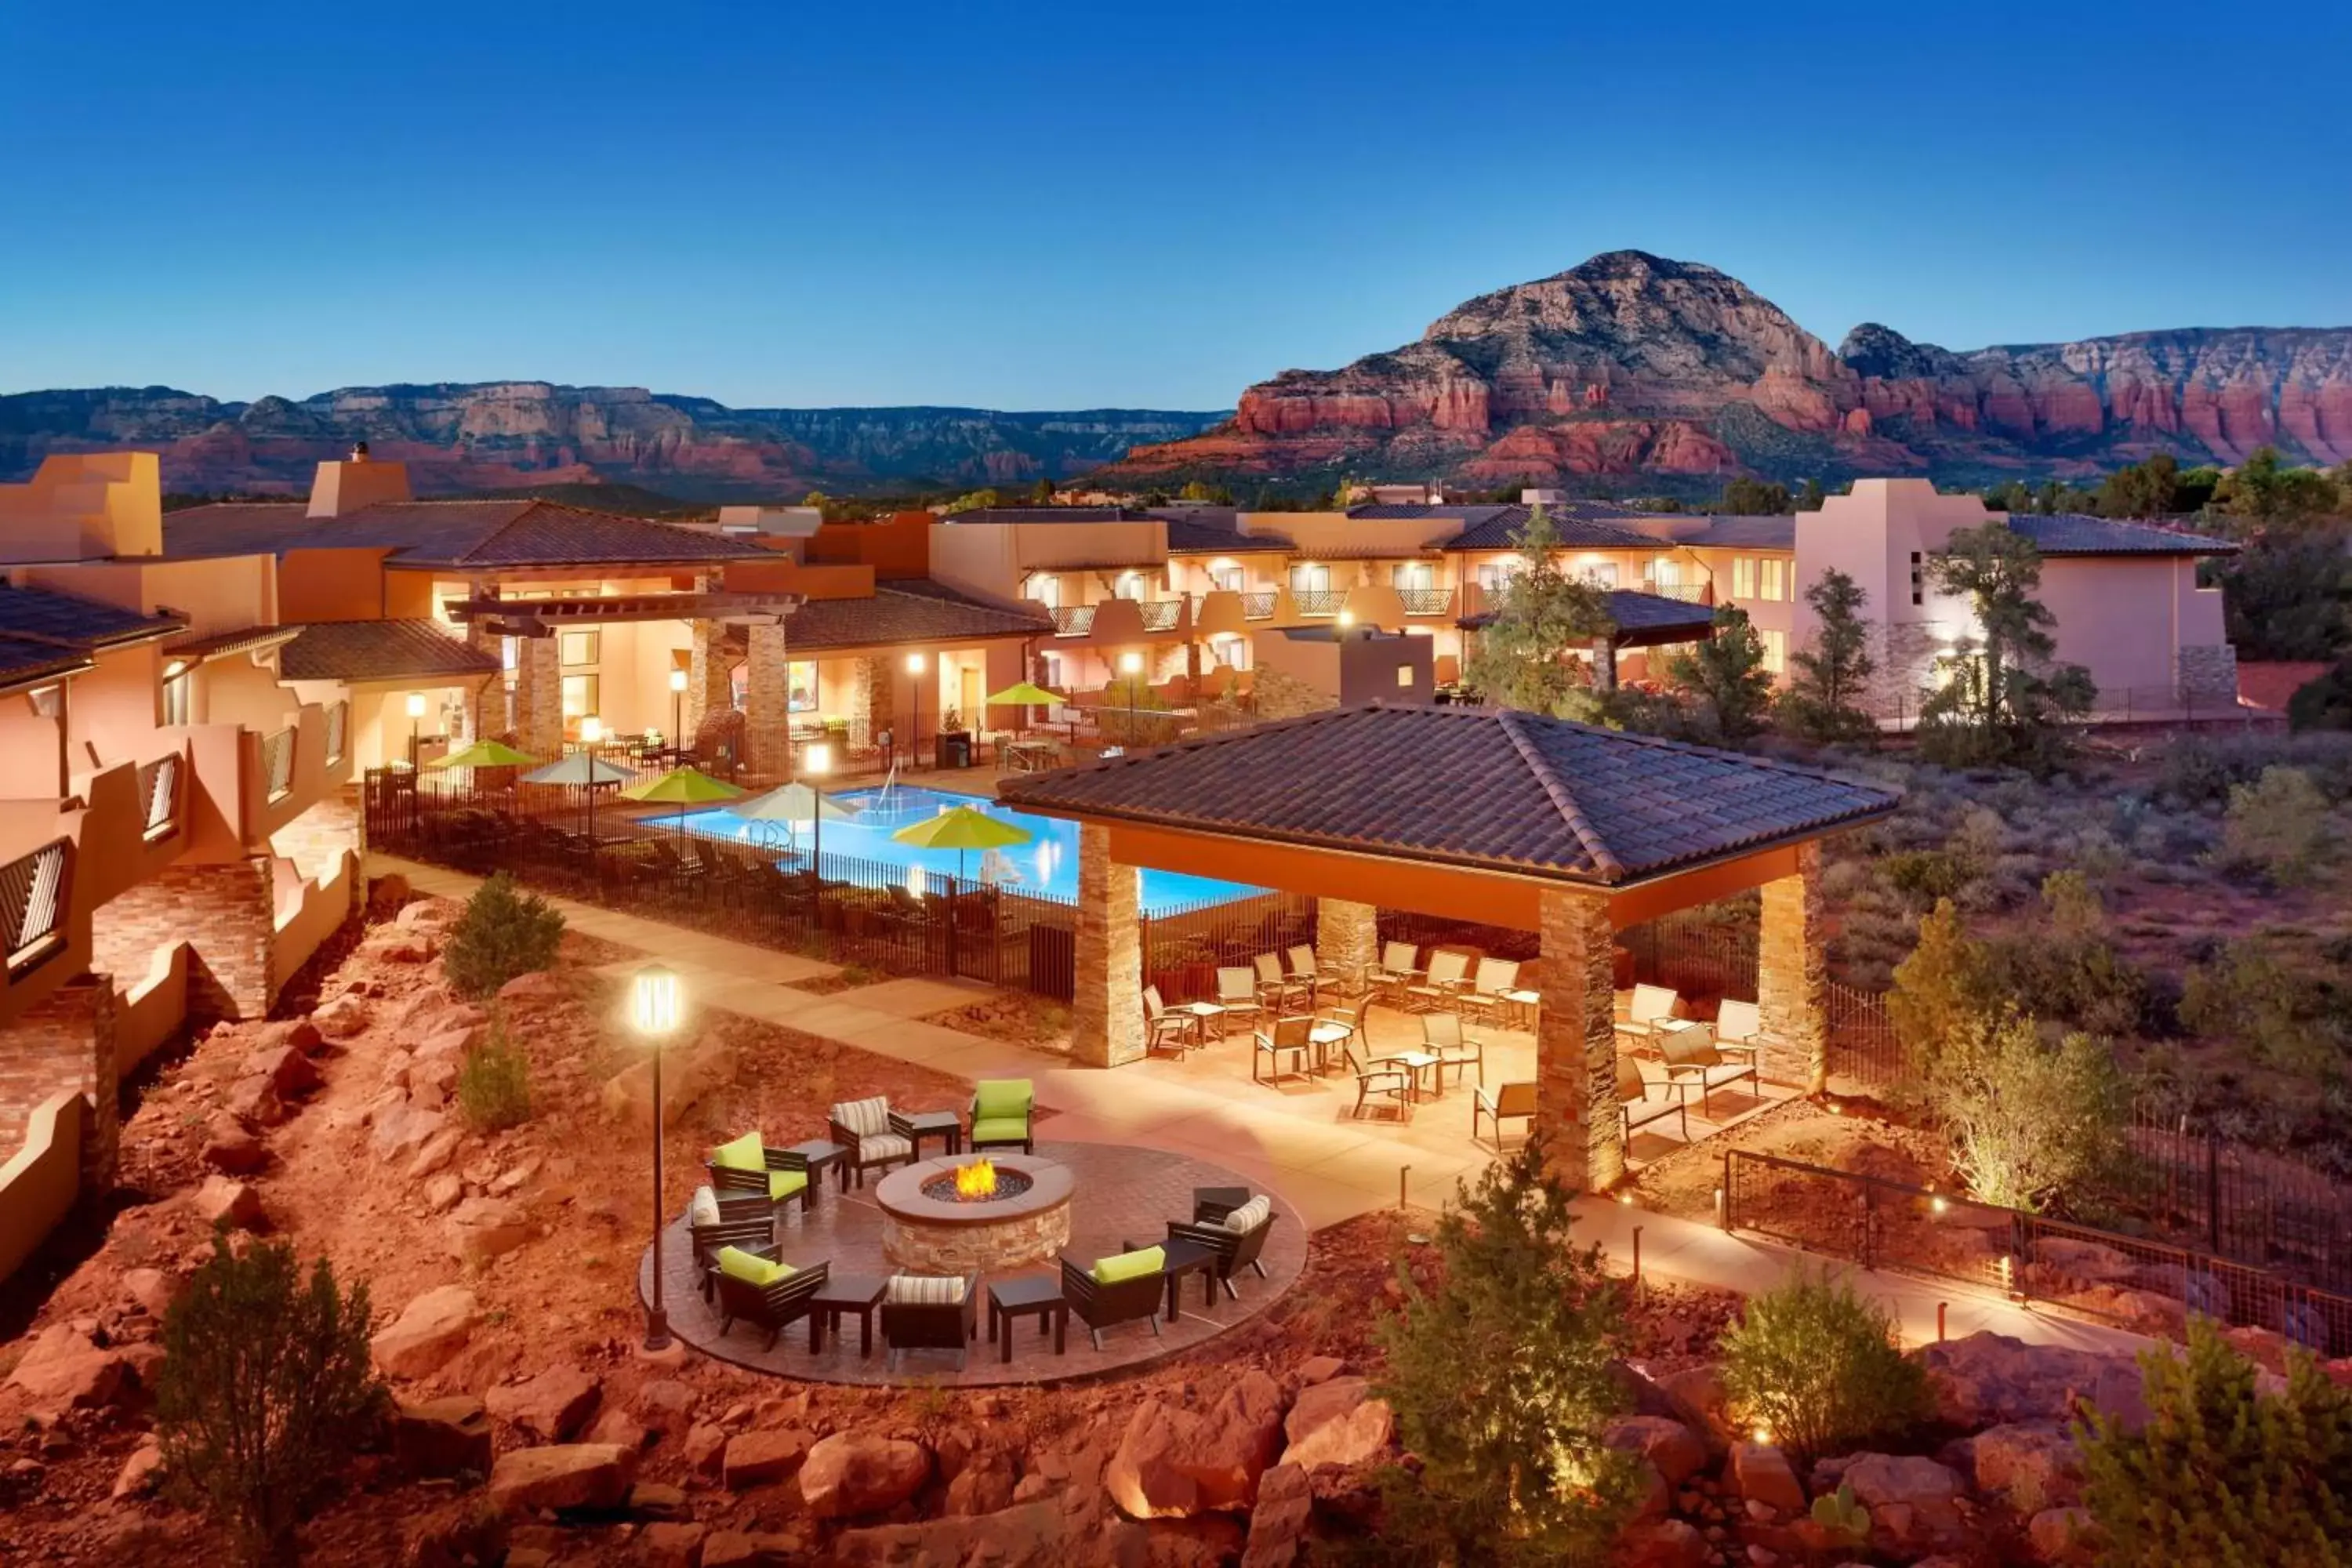 Property building, Pool View in Courtyard by Marriott Sedona